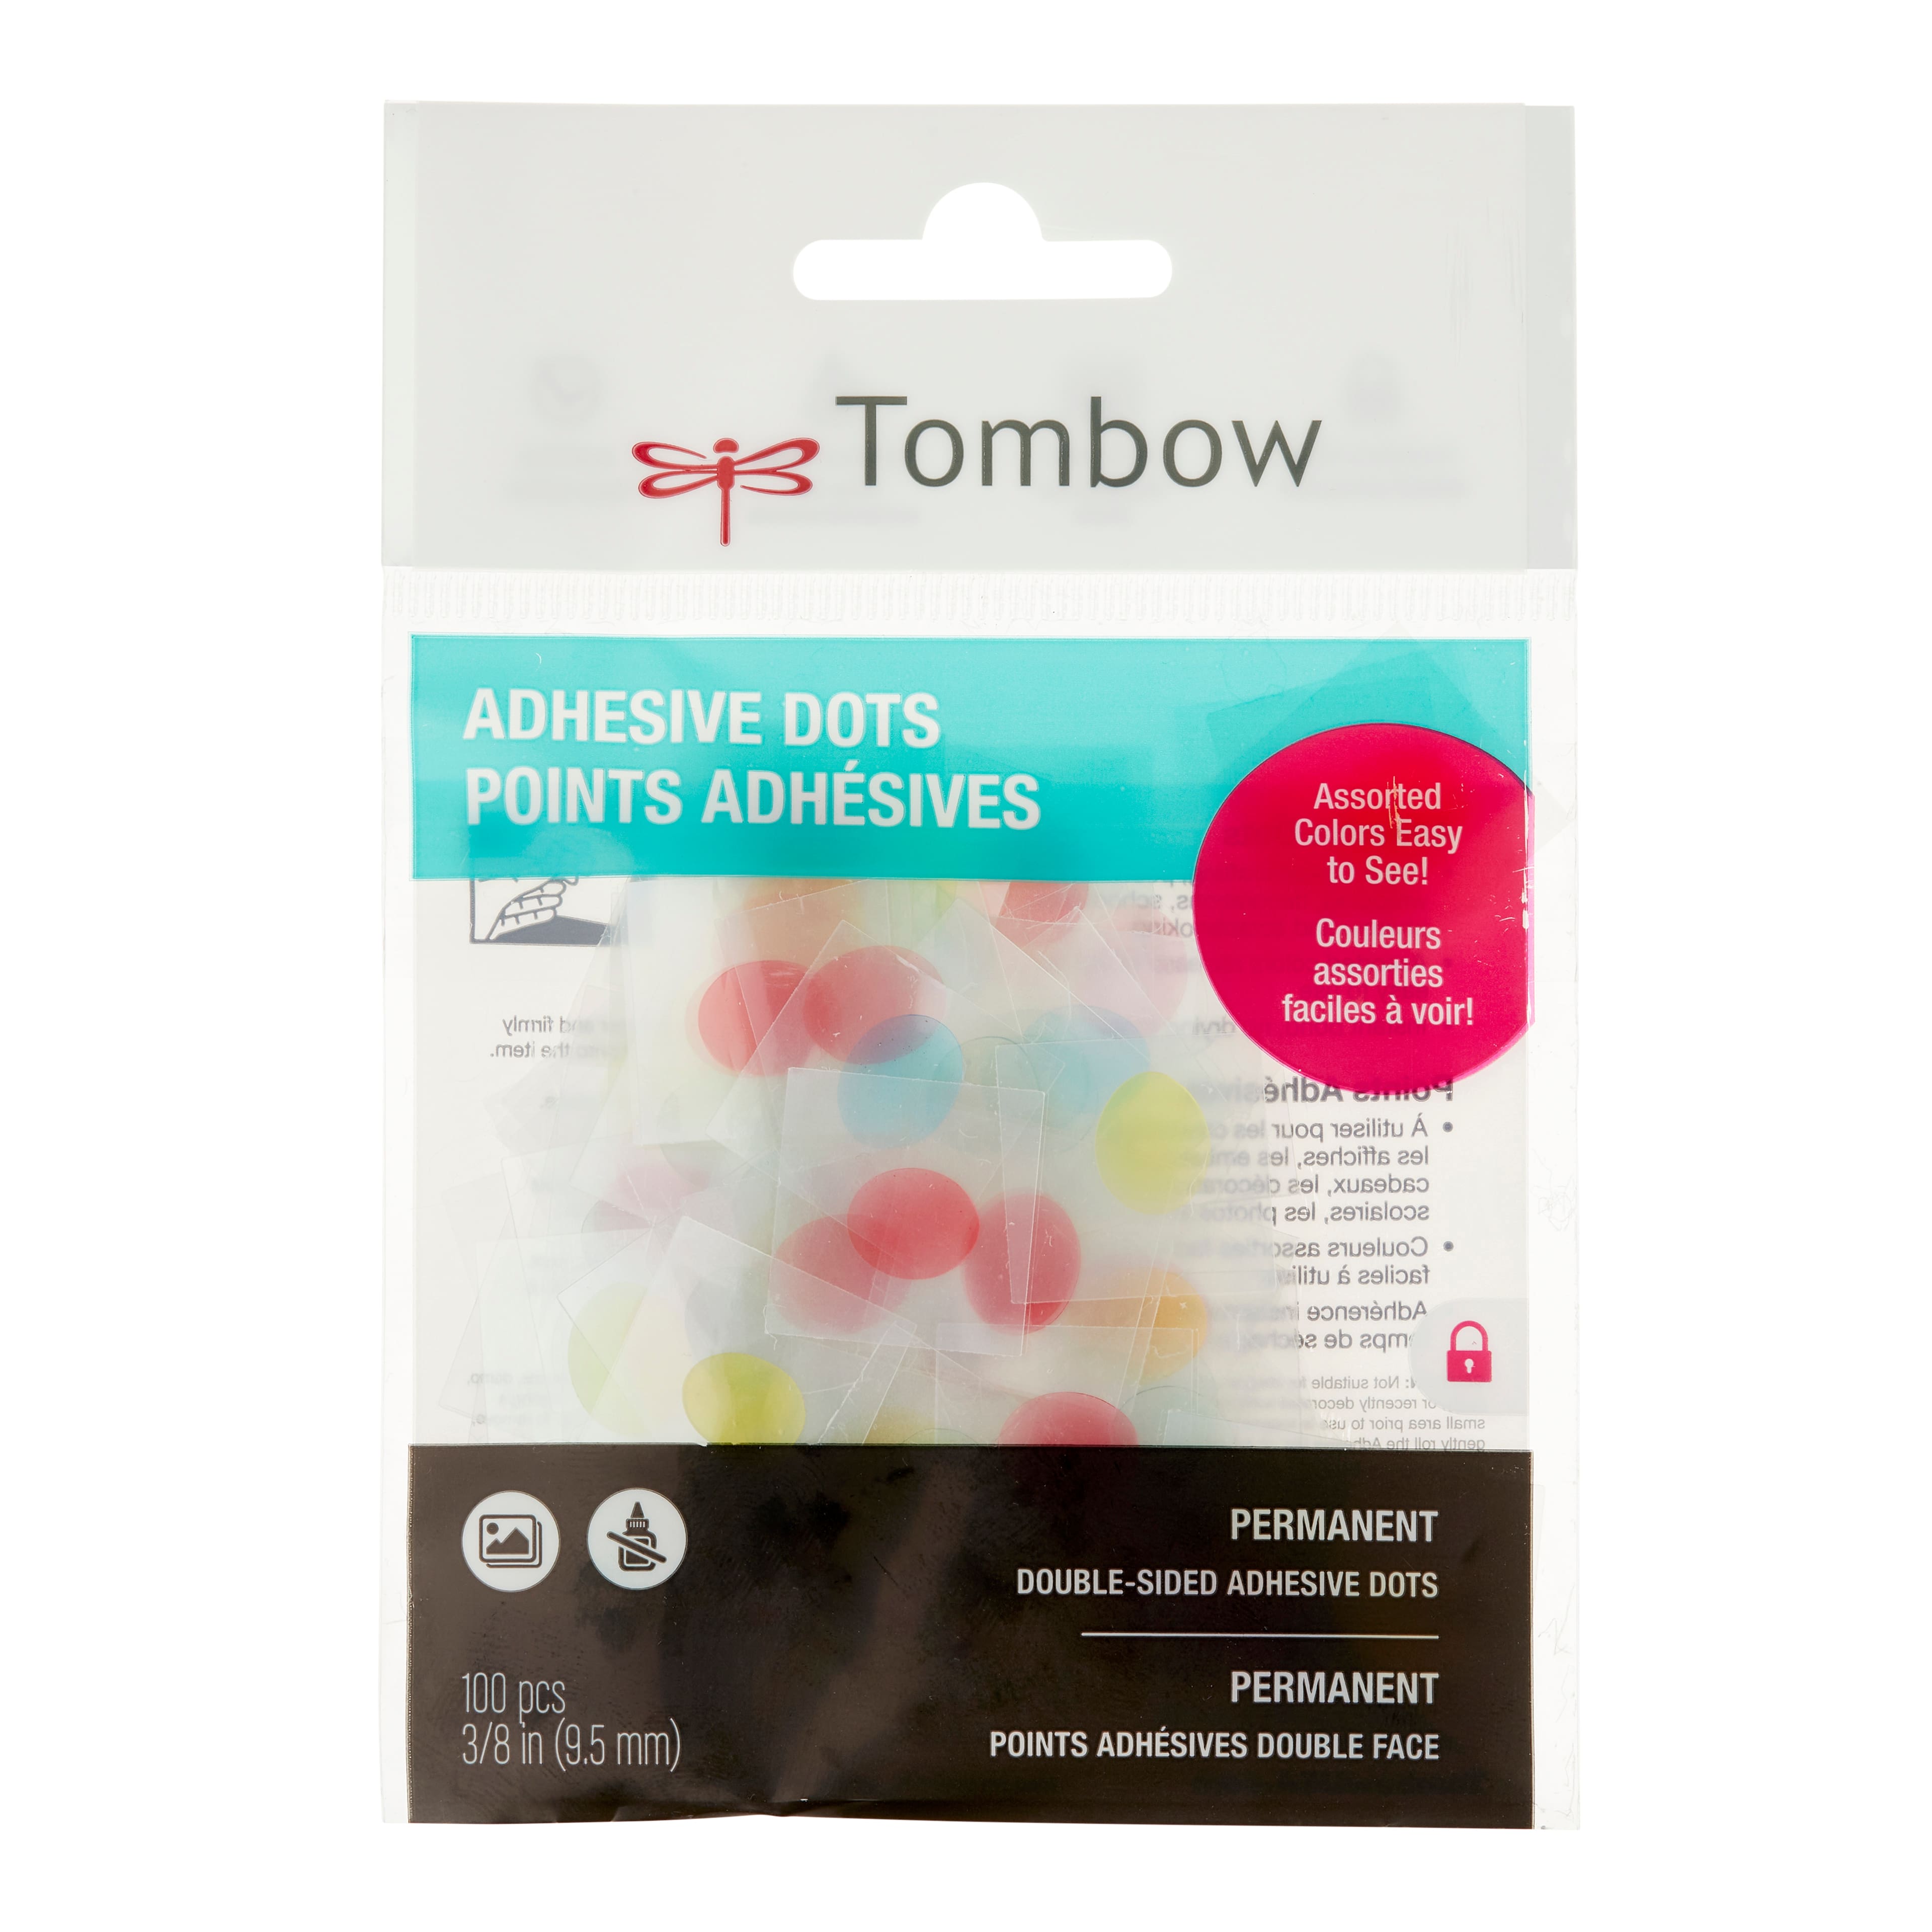 Tombow Adhesive Dots Assorted Colors 100-Pieces